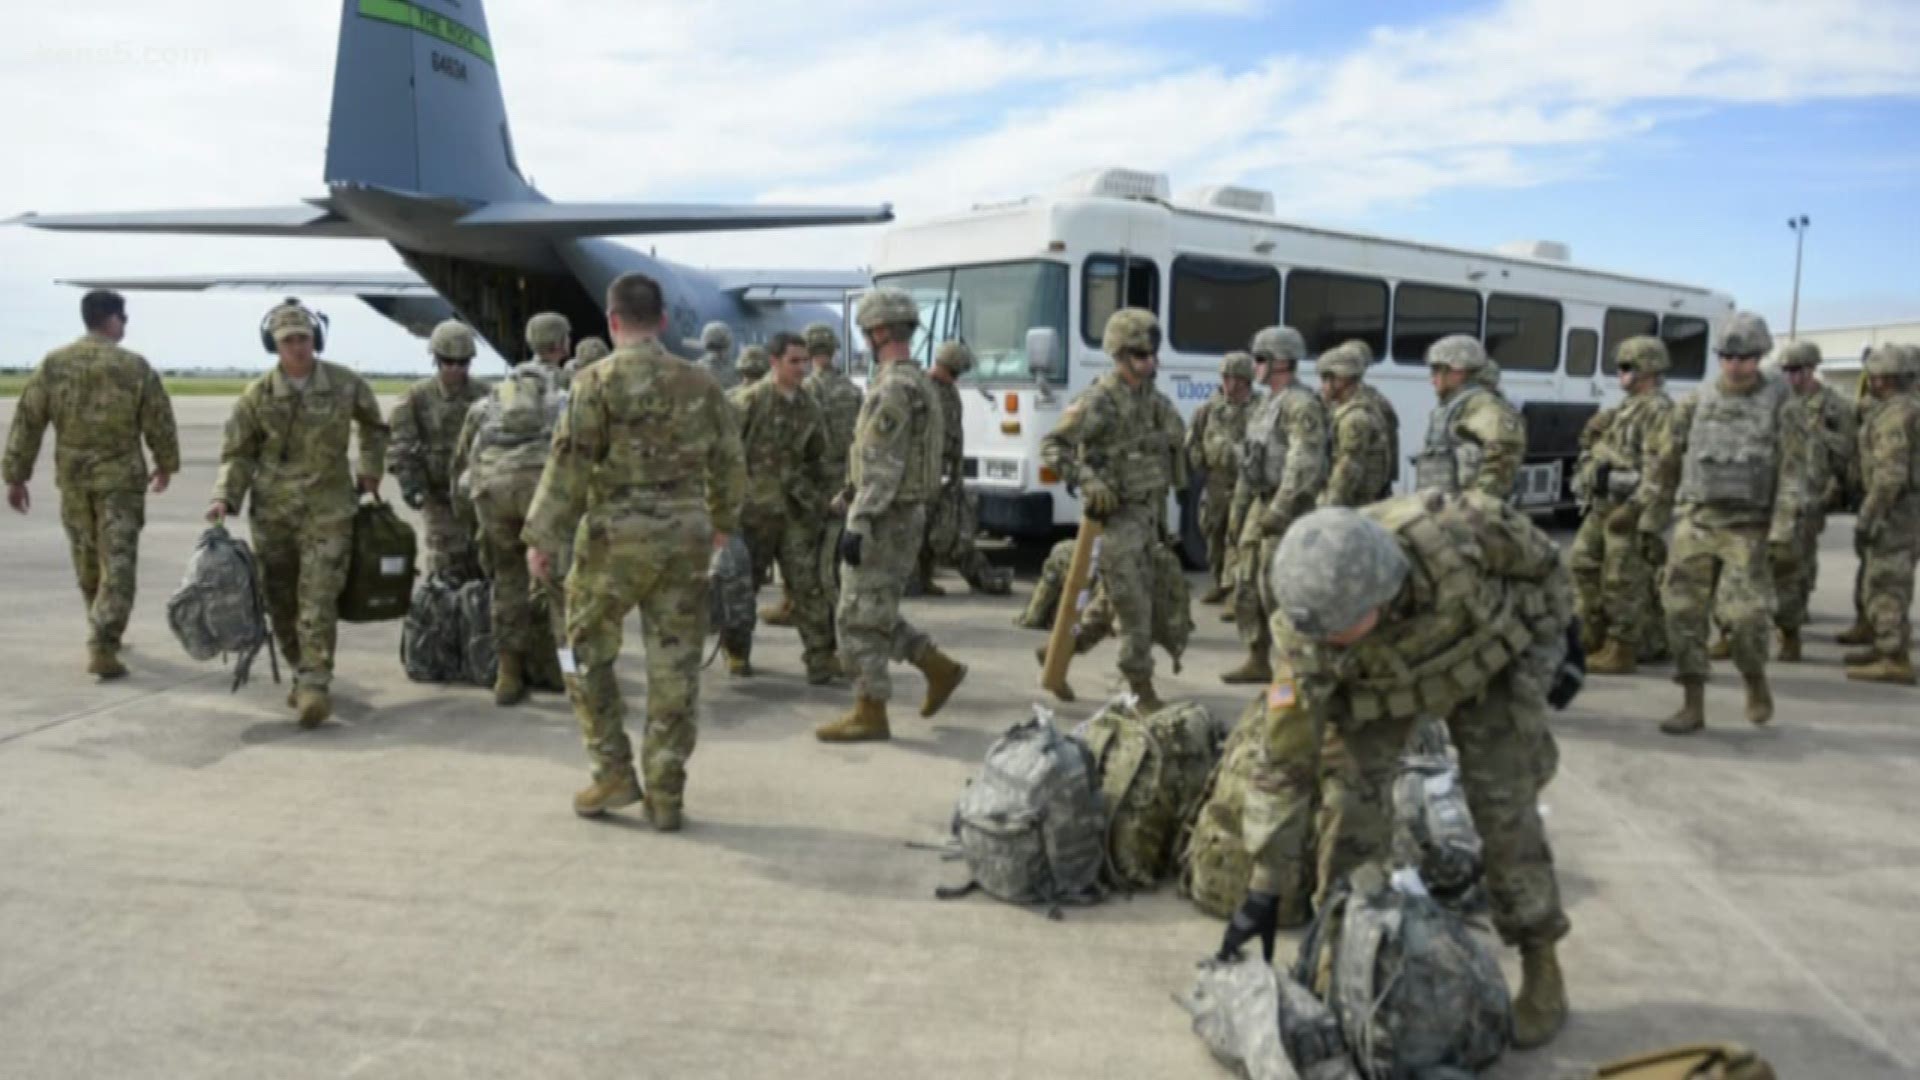 Troops wait in San Antonio before heading to border for Operation